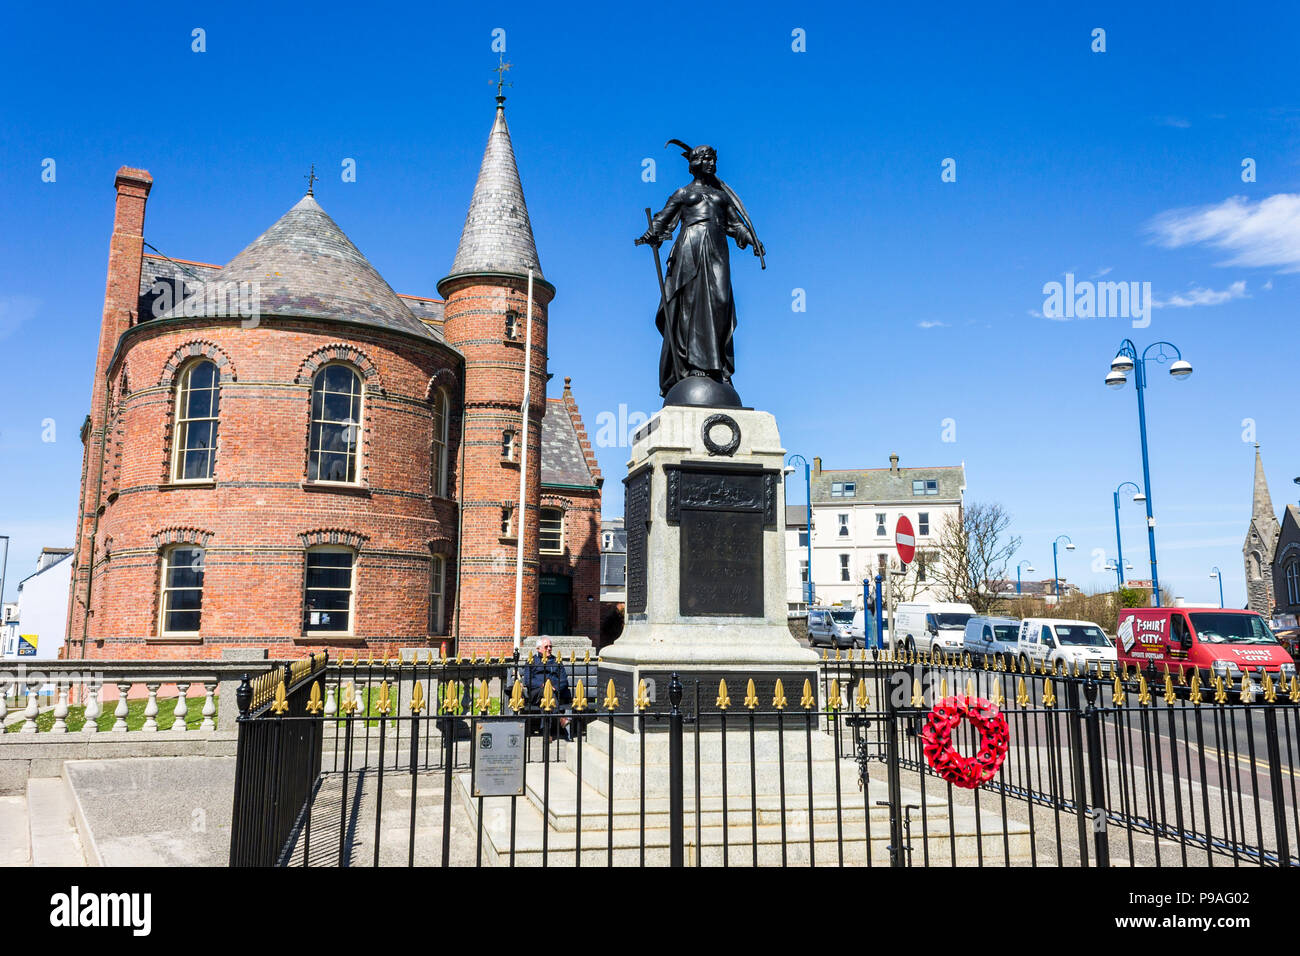 Portrush, Northern Ireland. The Great War Memorial in front of Portrush Town Hall, a fine example of Victorian municipal architecture Stock Photo